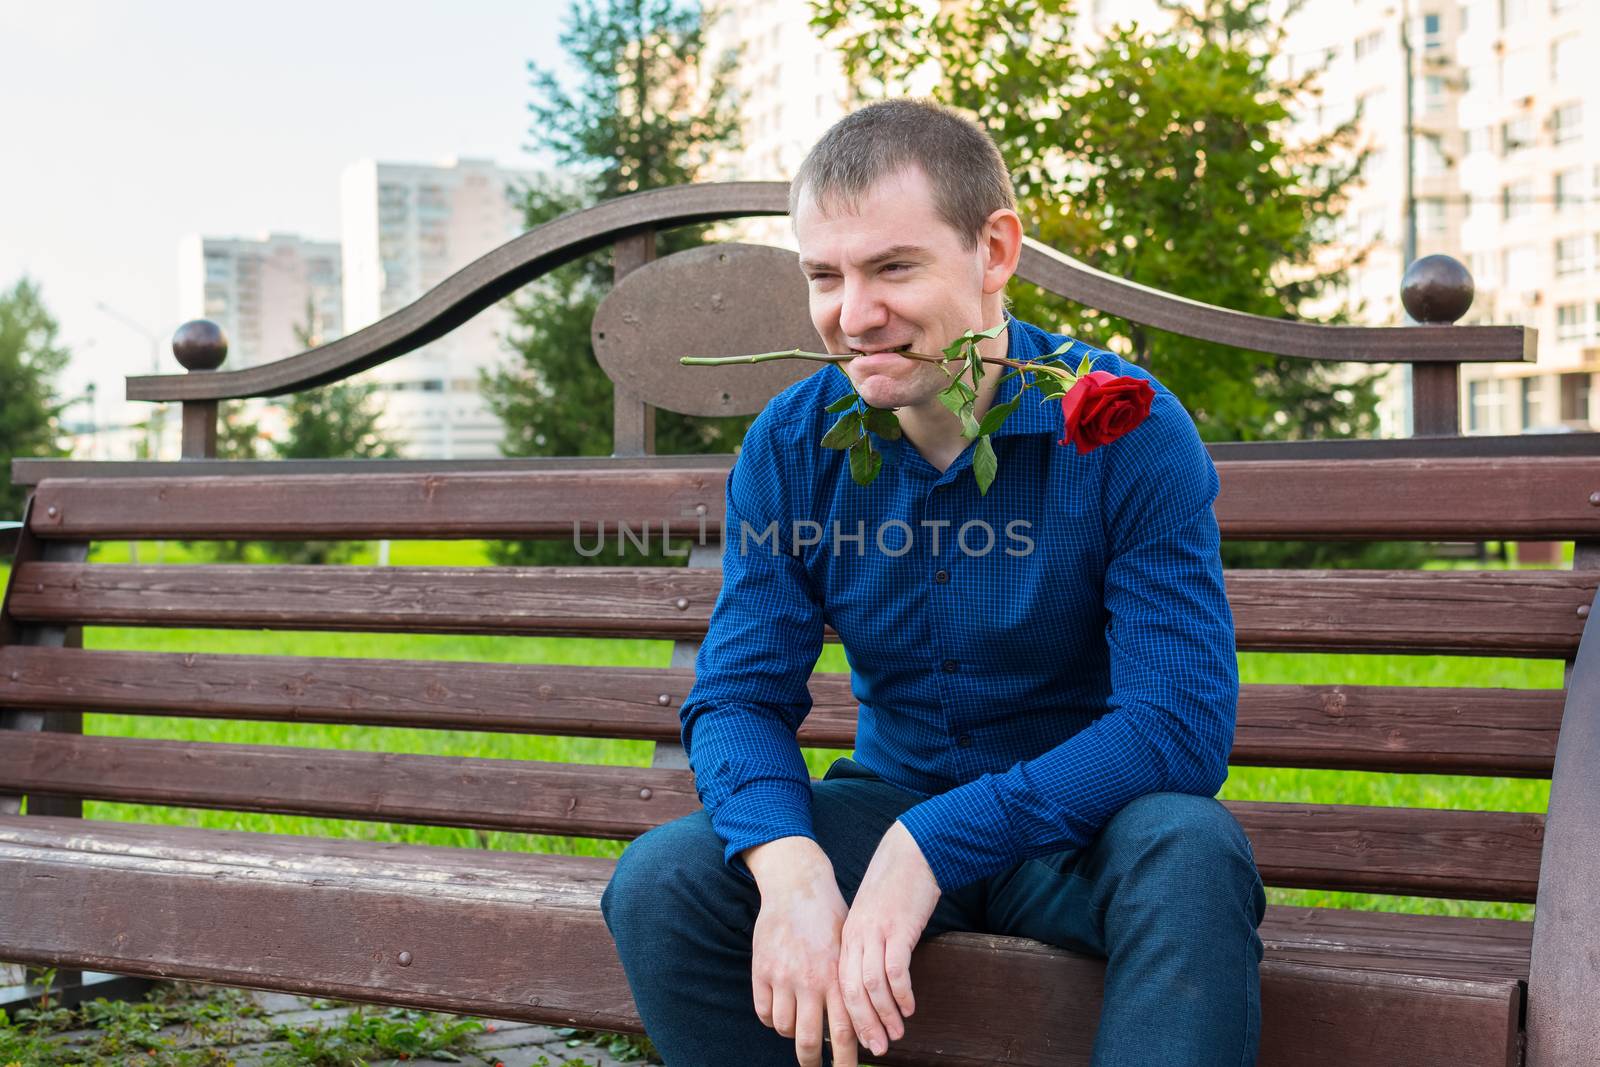 A man with a rose in his teeth sits on a park bench and is looking for single ladies